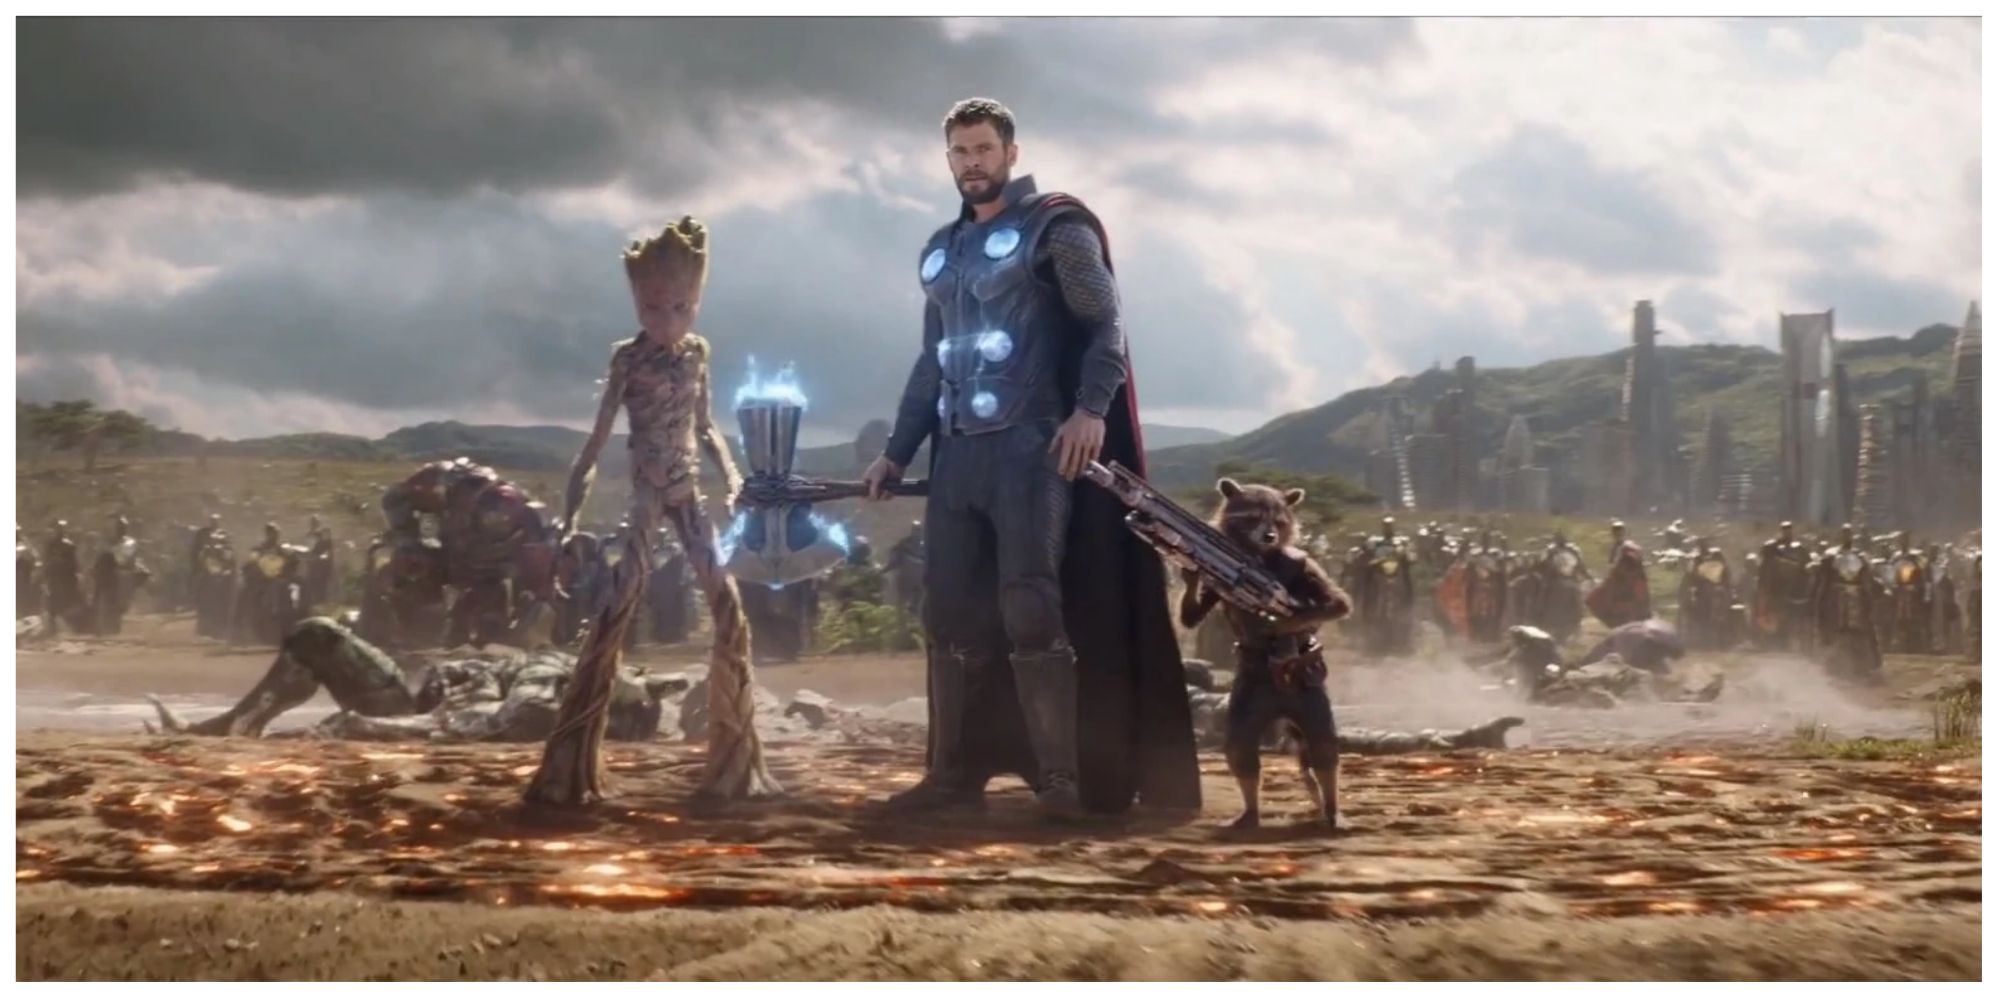 Thor, Rocket, and Groot arriving at Wakanda for the battle against Thanos